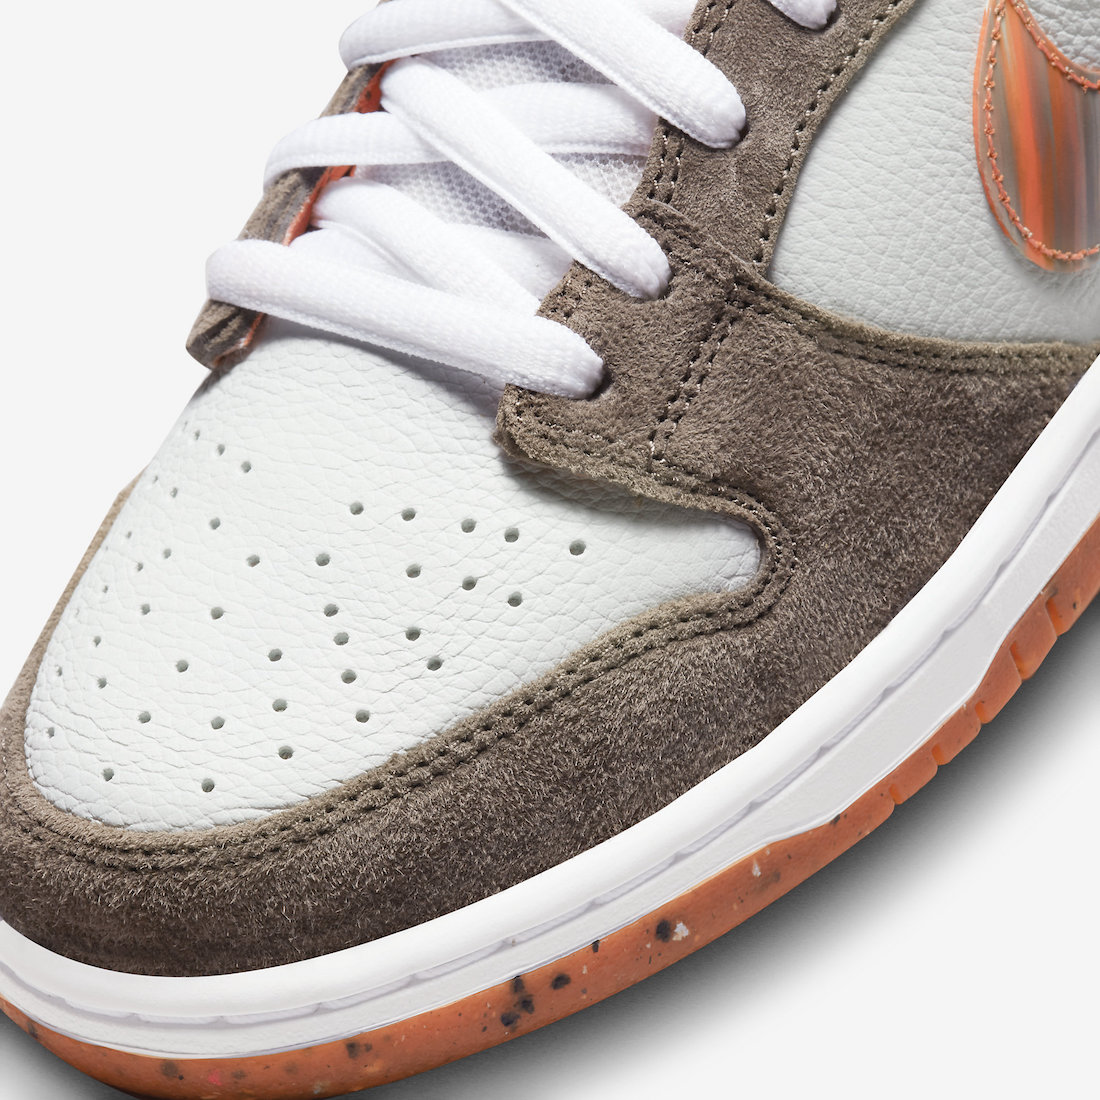 Crushed DC Nike SB Dunk Low DH7782-001 Release Date